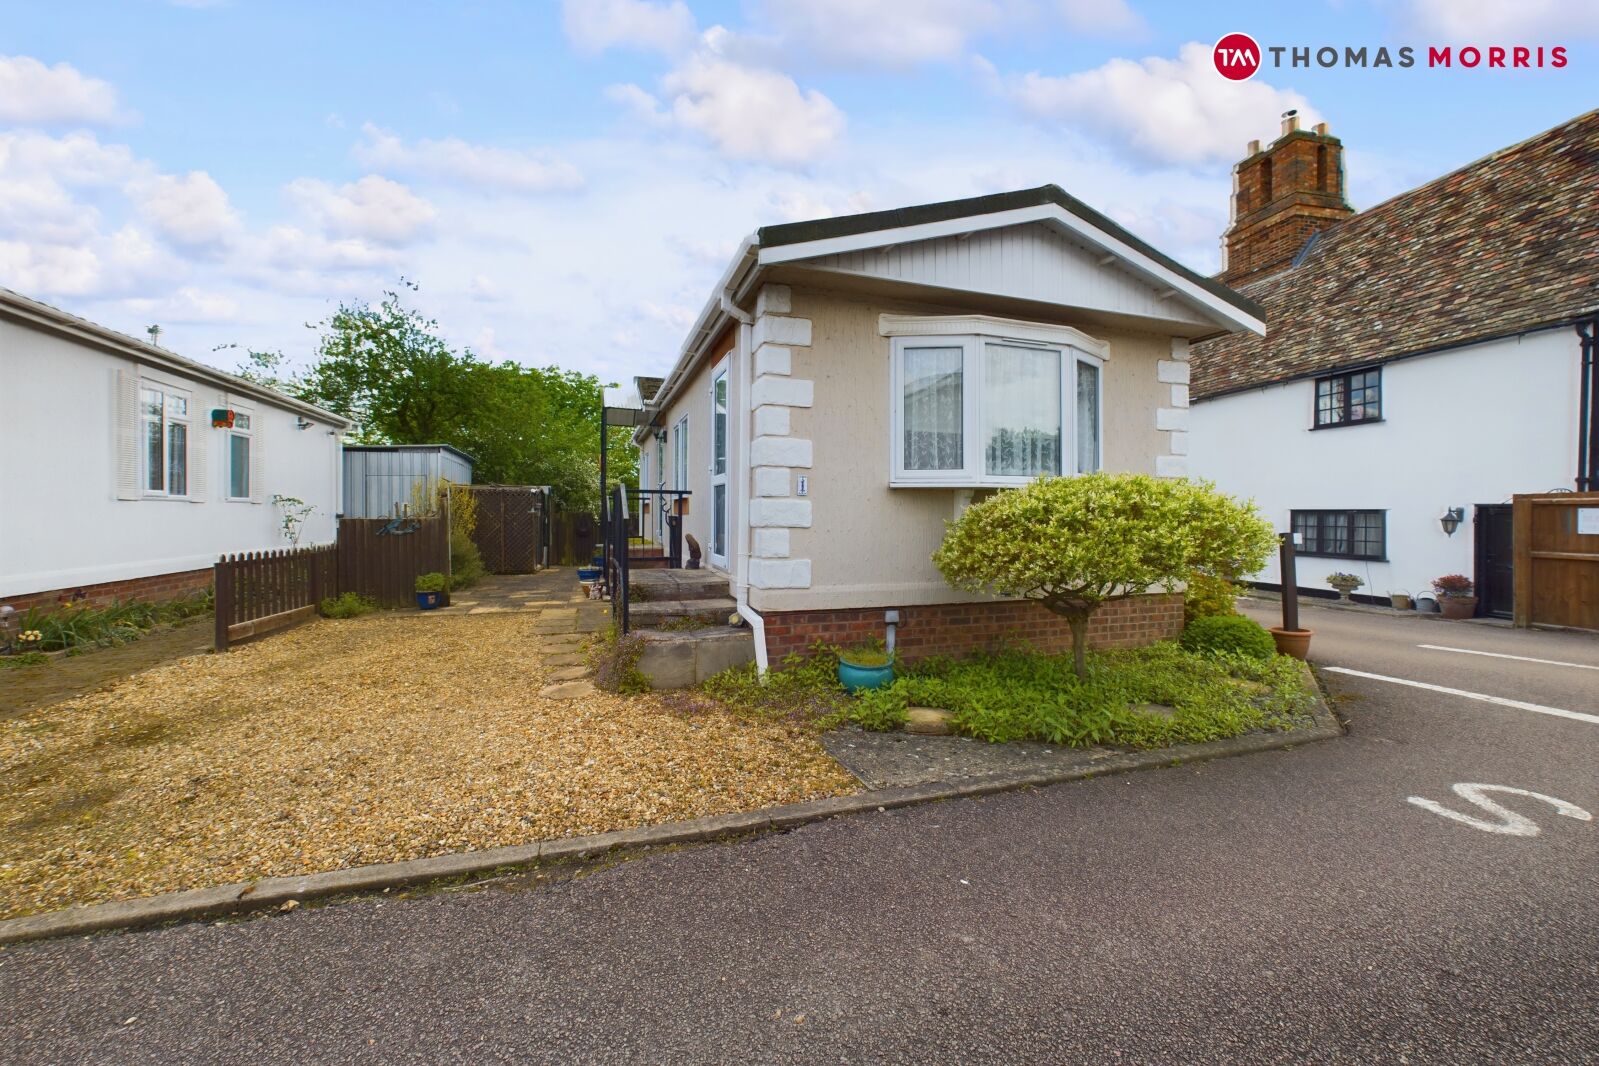 2 bedroom detached parkhome for sale Lordsway Park Homes, High Street, PE28, main image